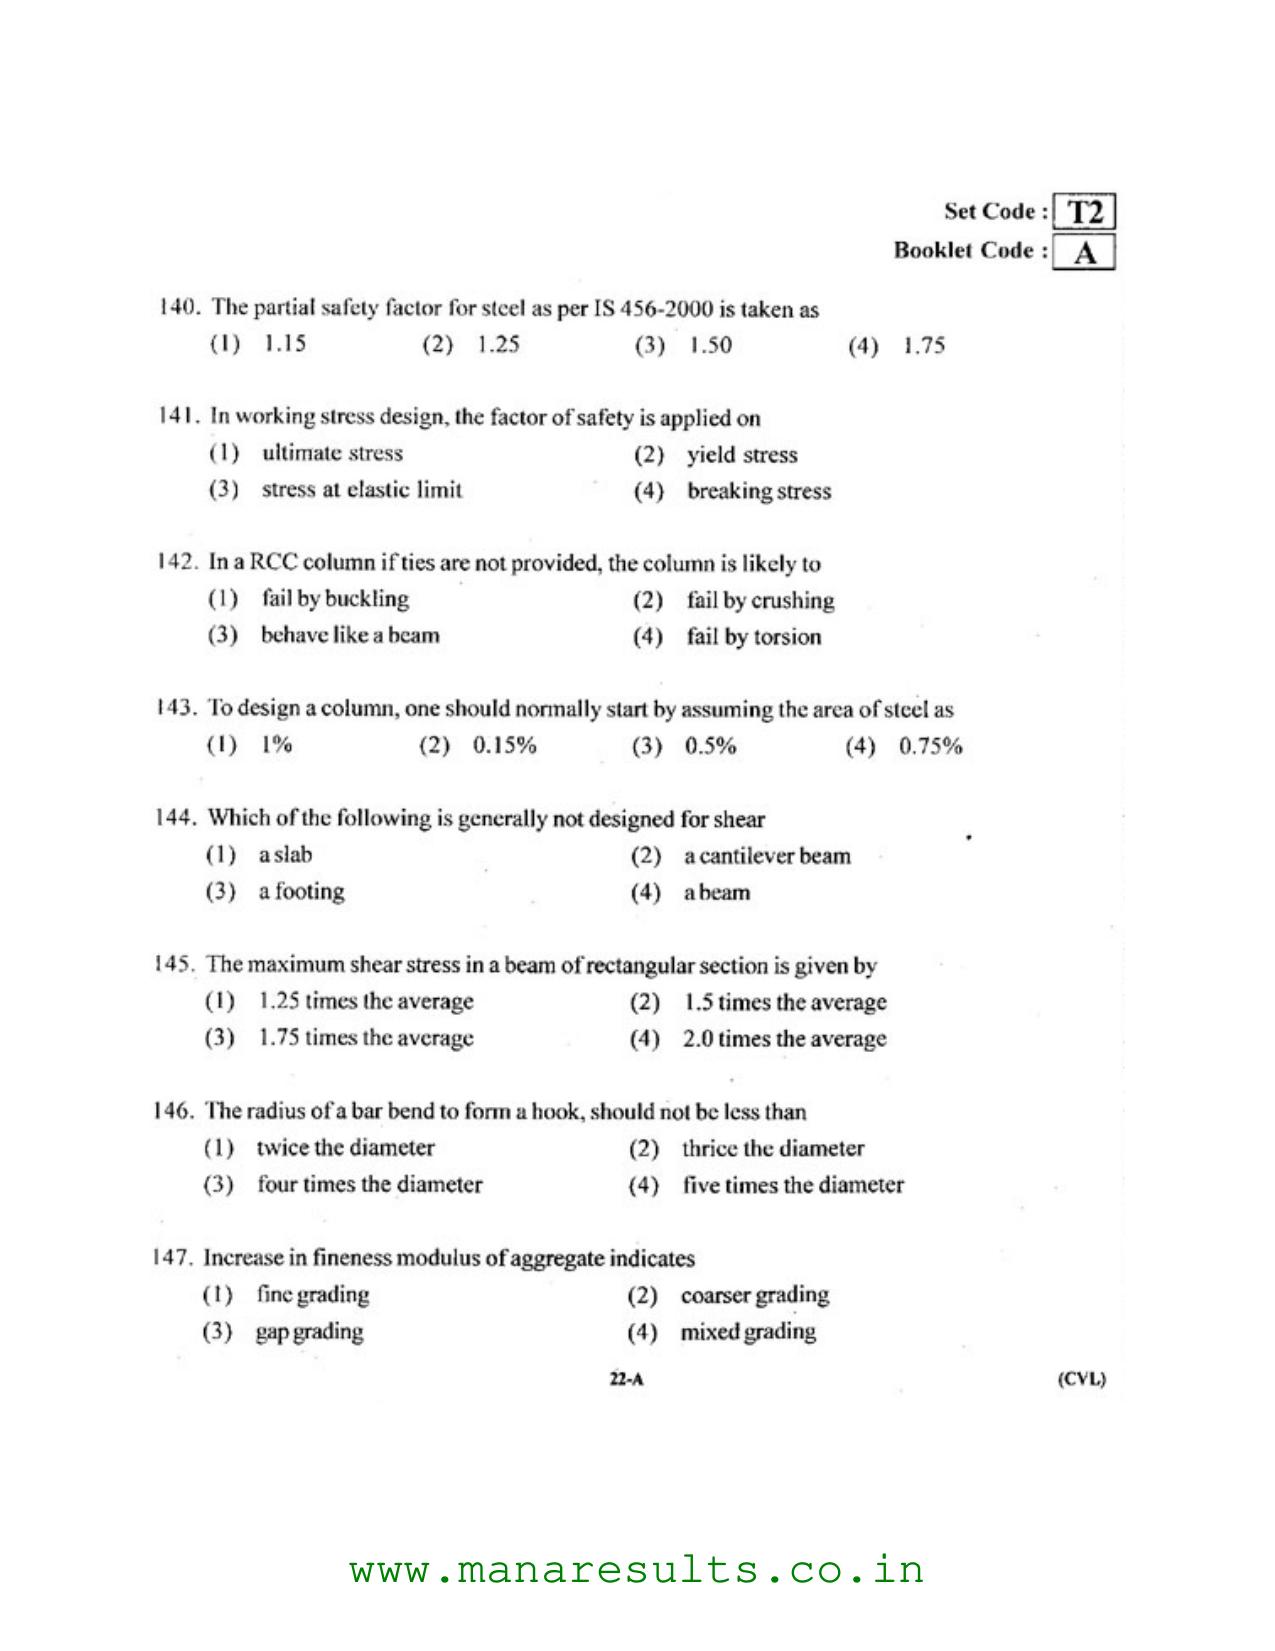 AP ECET 2016 Civil Engineering Old Previous Question Papers - Page 21